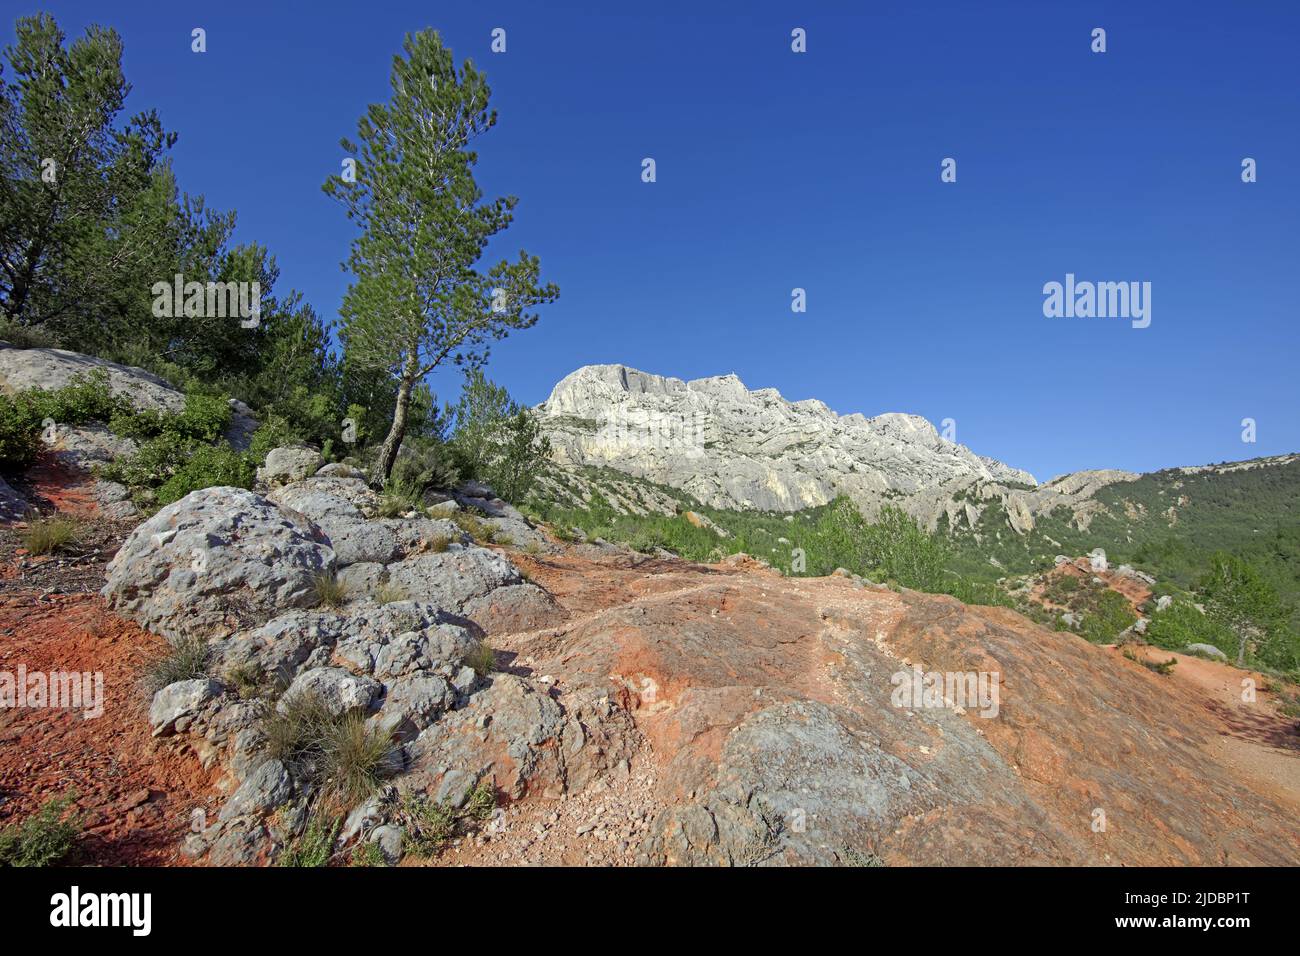 France, Bouches-du-Rhône Aix-en-Provence, the Sainte-Victoire mountain, seen from the pink marble aggregates Stock Photo